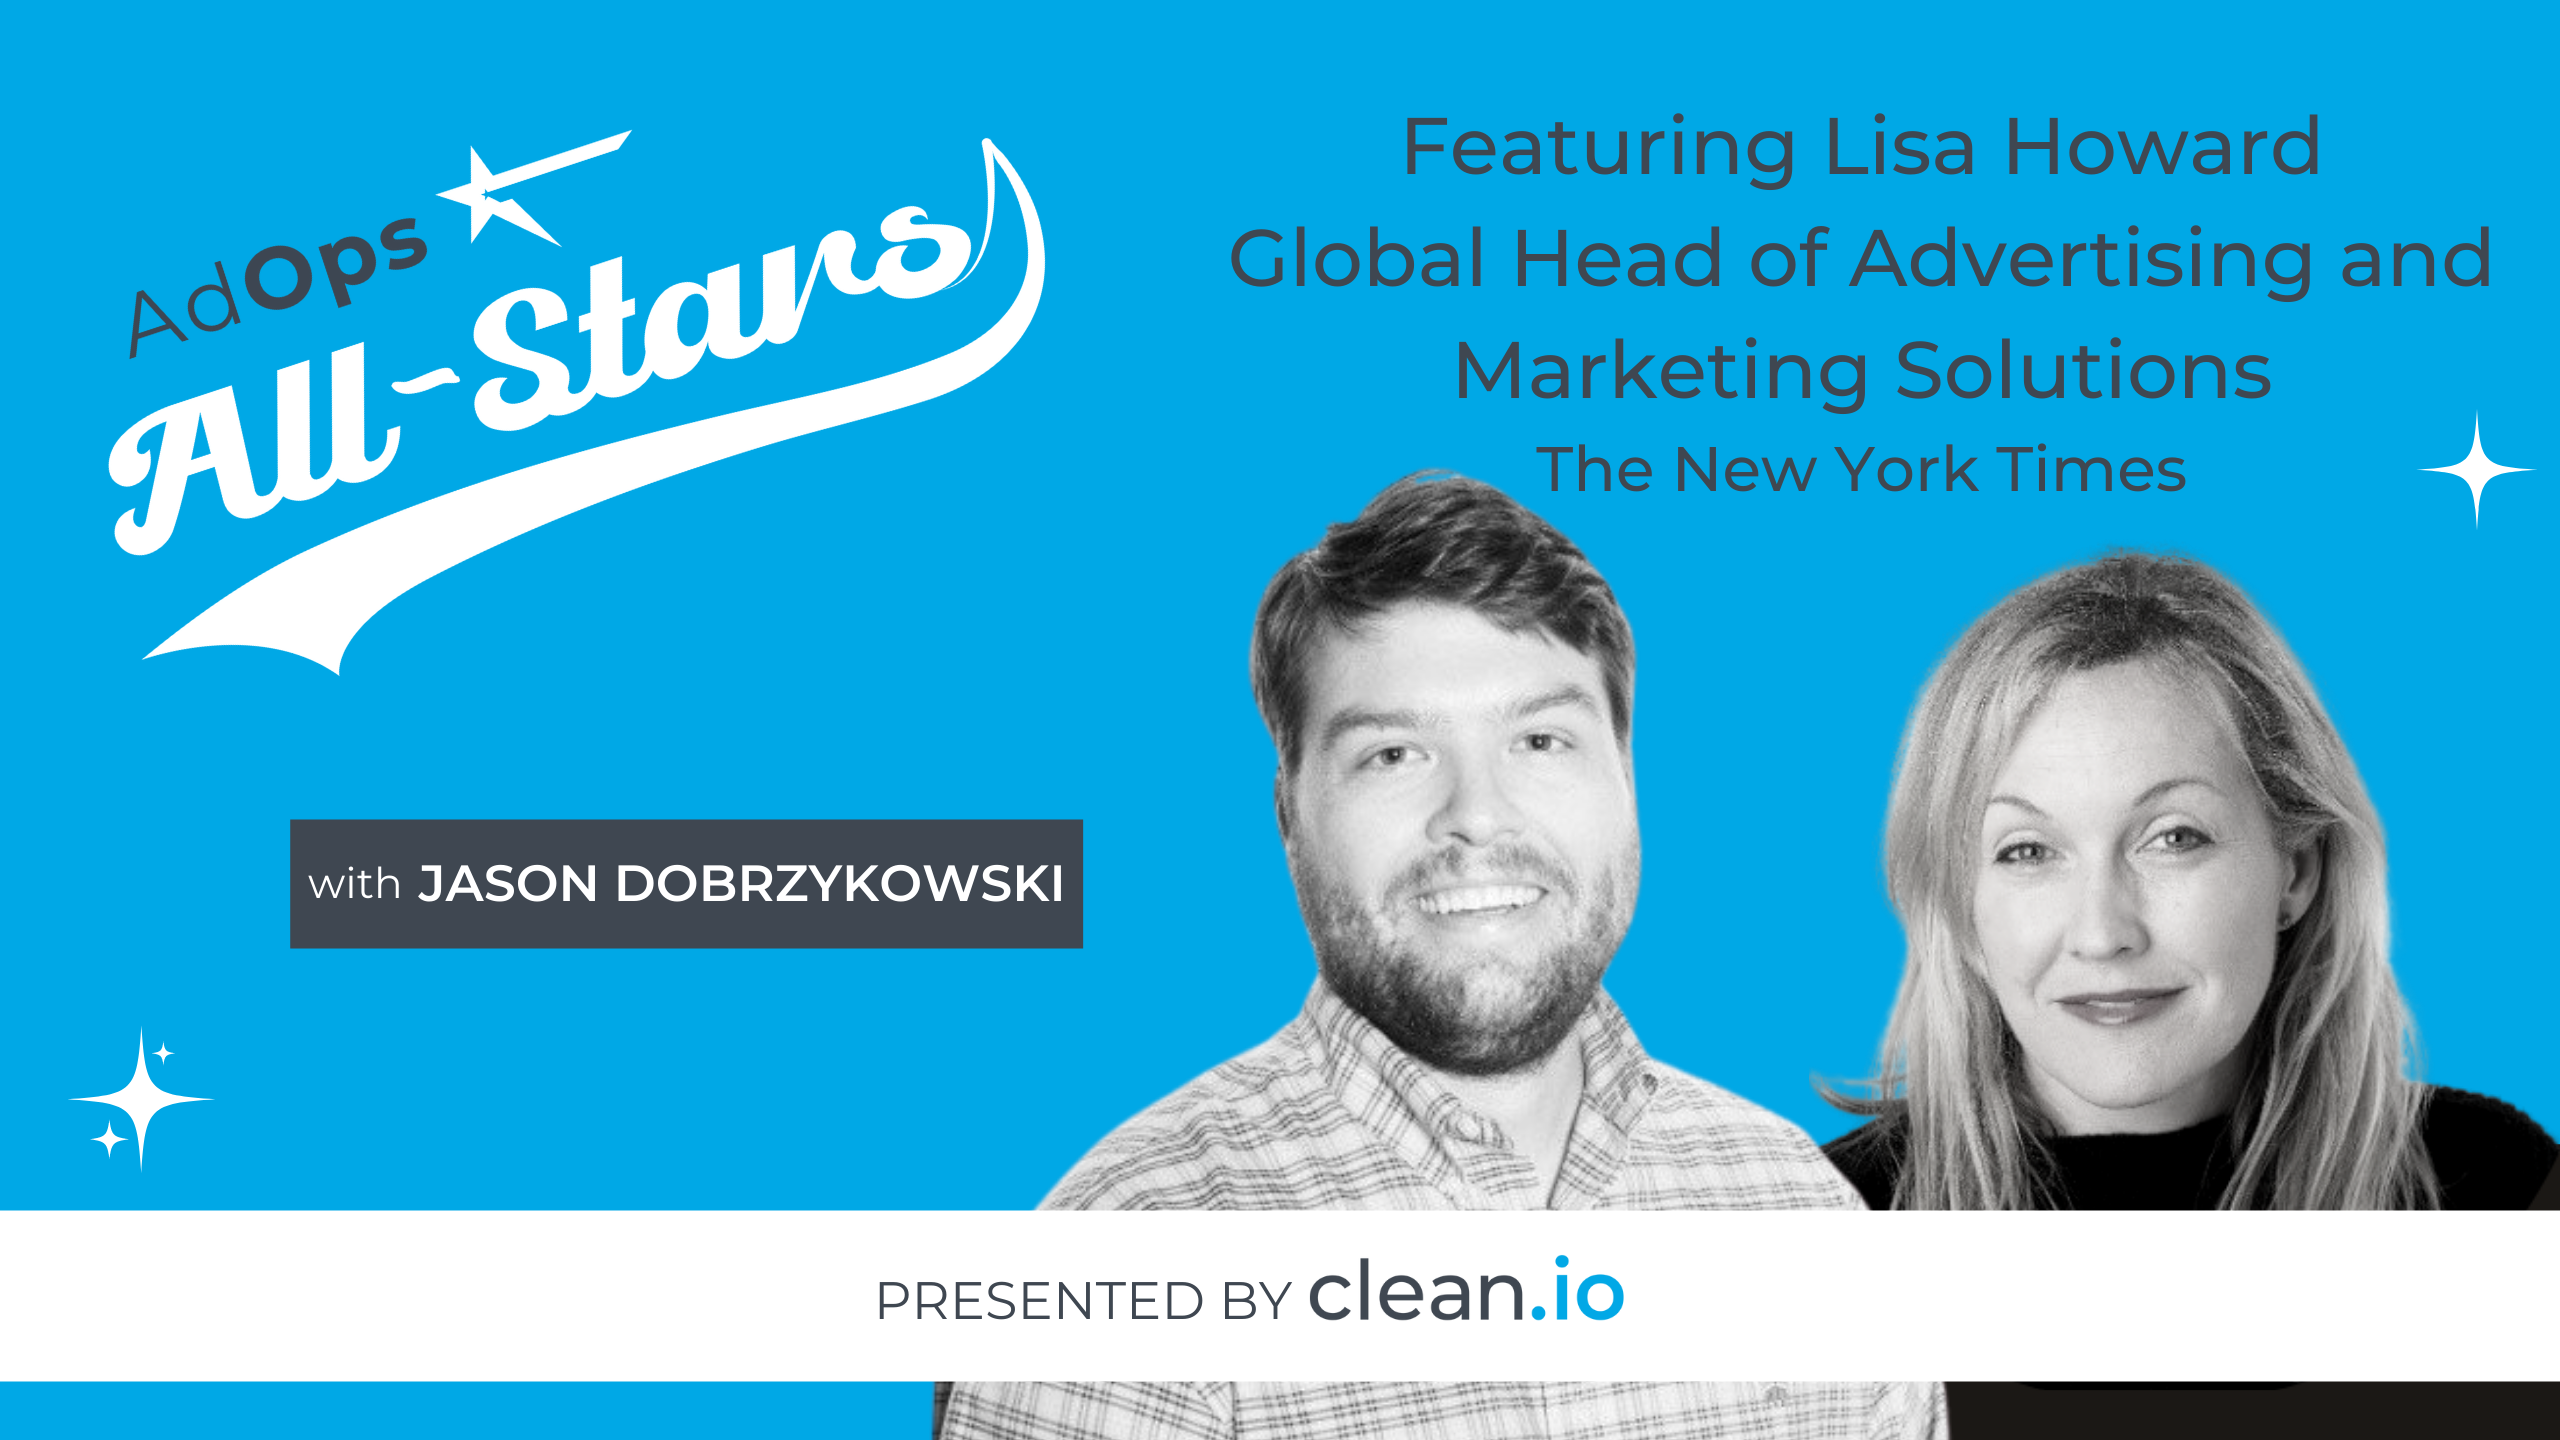 Ad Ops All Stars: Lisa Howard, Global Head of Advertising and Marketing Solutions, The New York Times